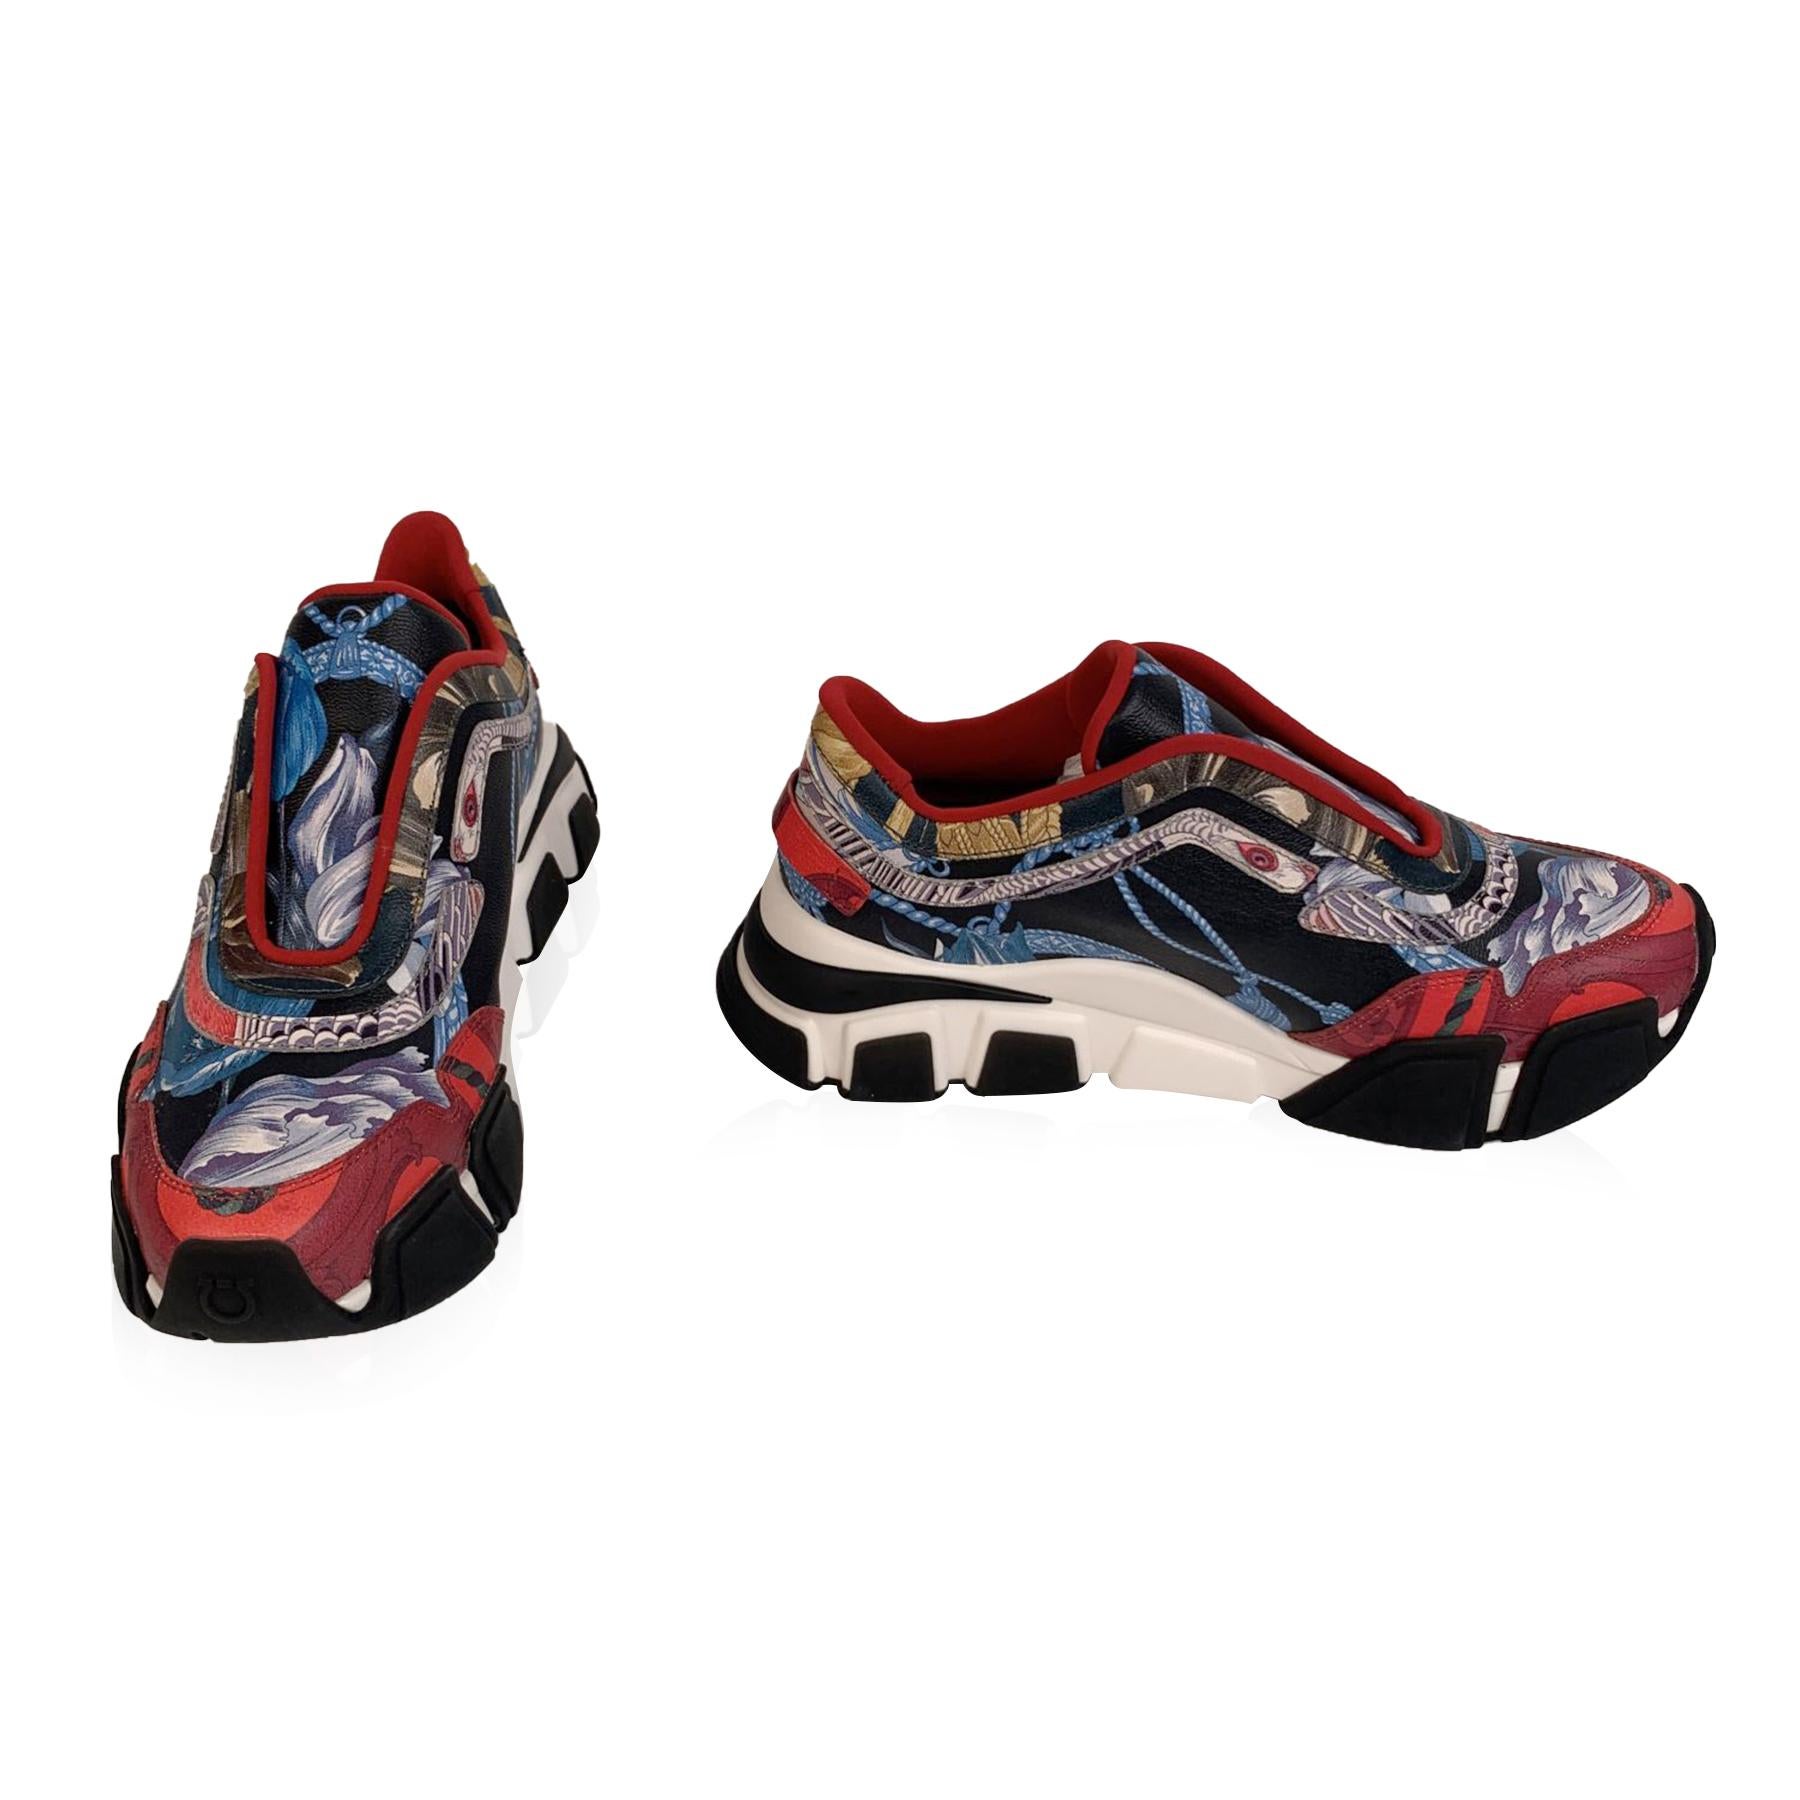 Beautiful Salvatore Ferragamo ' Gatteo ST' Sneakers. They feature a slip-on style, chunky design and a multicolored leather upper.Rubber sole. Made in Italy. Size: US 7.5 C - EU 38 (The size shown for this item is the size indicated by the designer